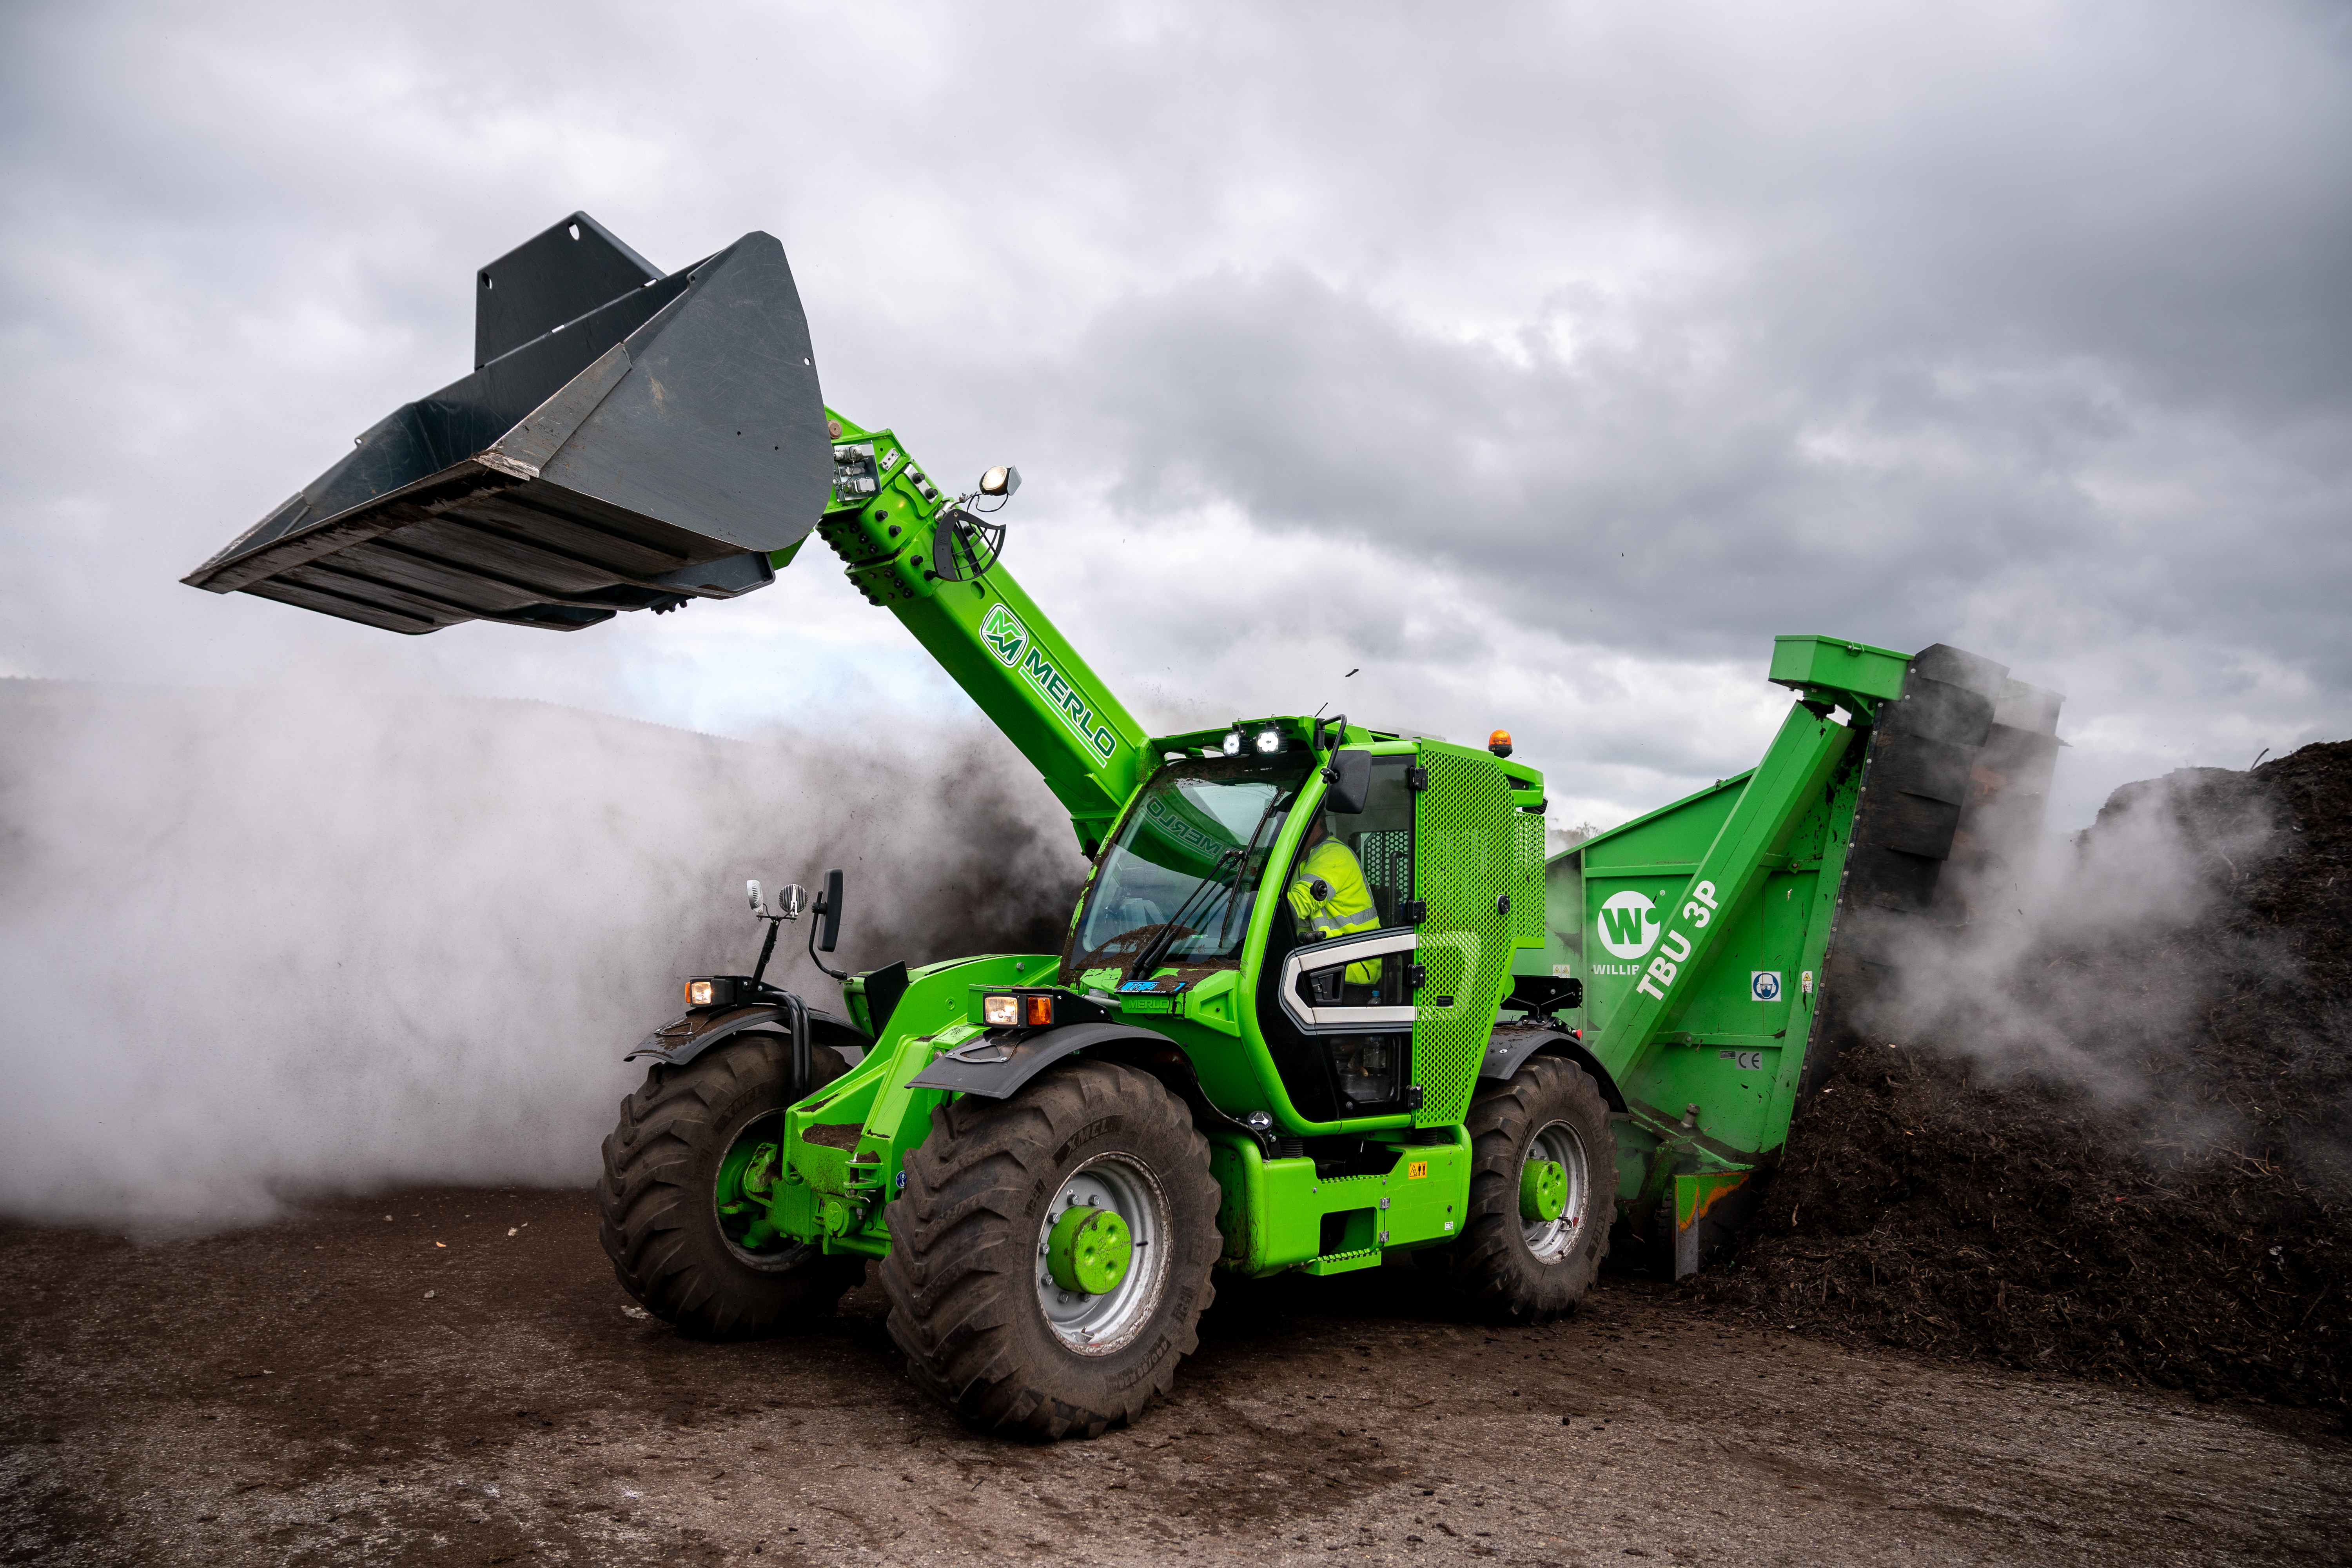 Turning compost piles: In order to achieve a high compost quality the piles must be turned regularly